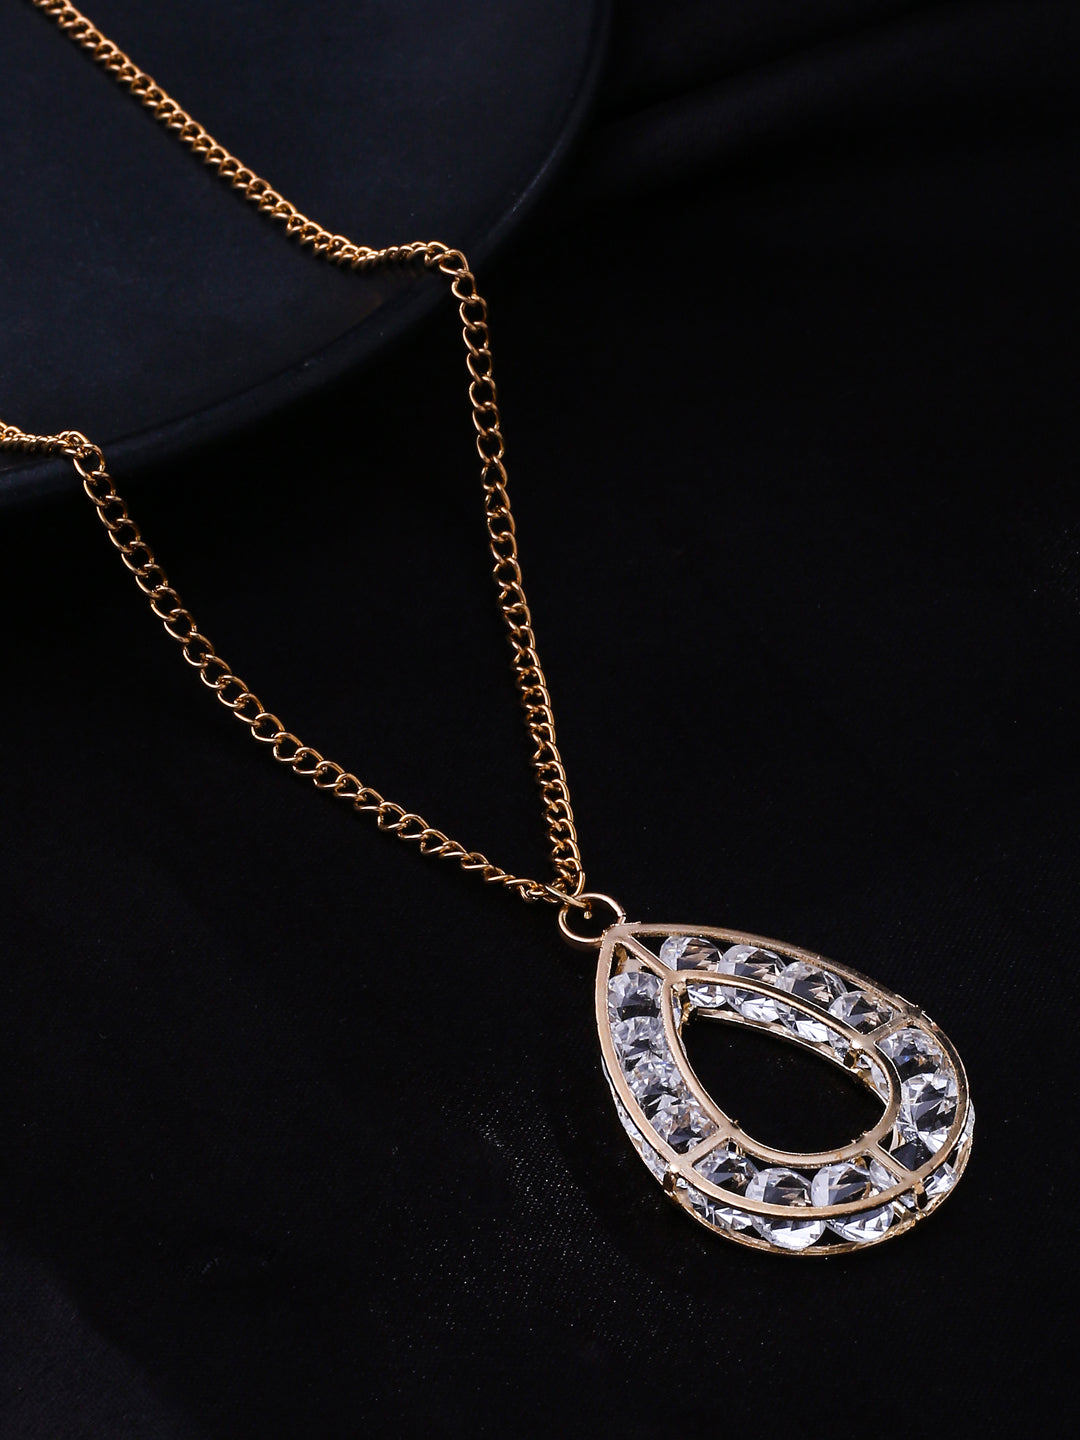 Women's Gold-Plated Oxidised Bohemian Necklace - NVR